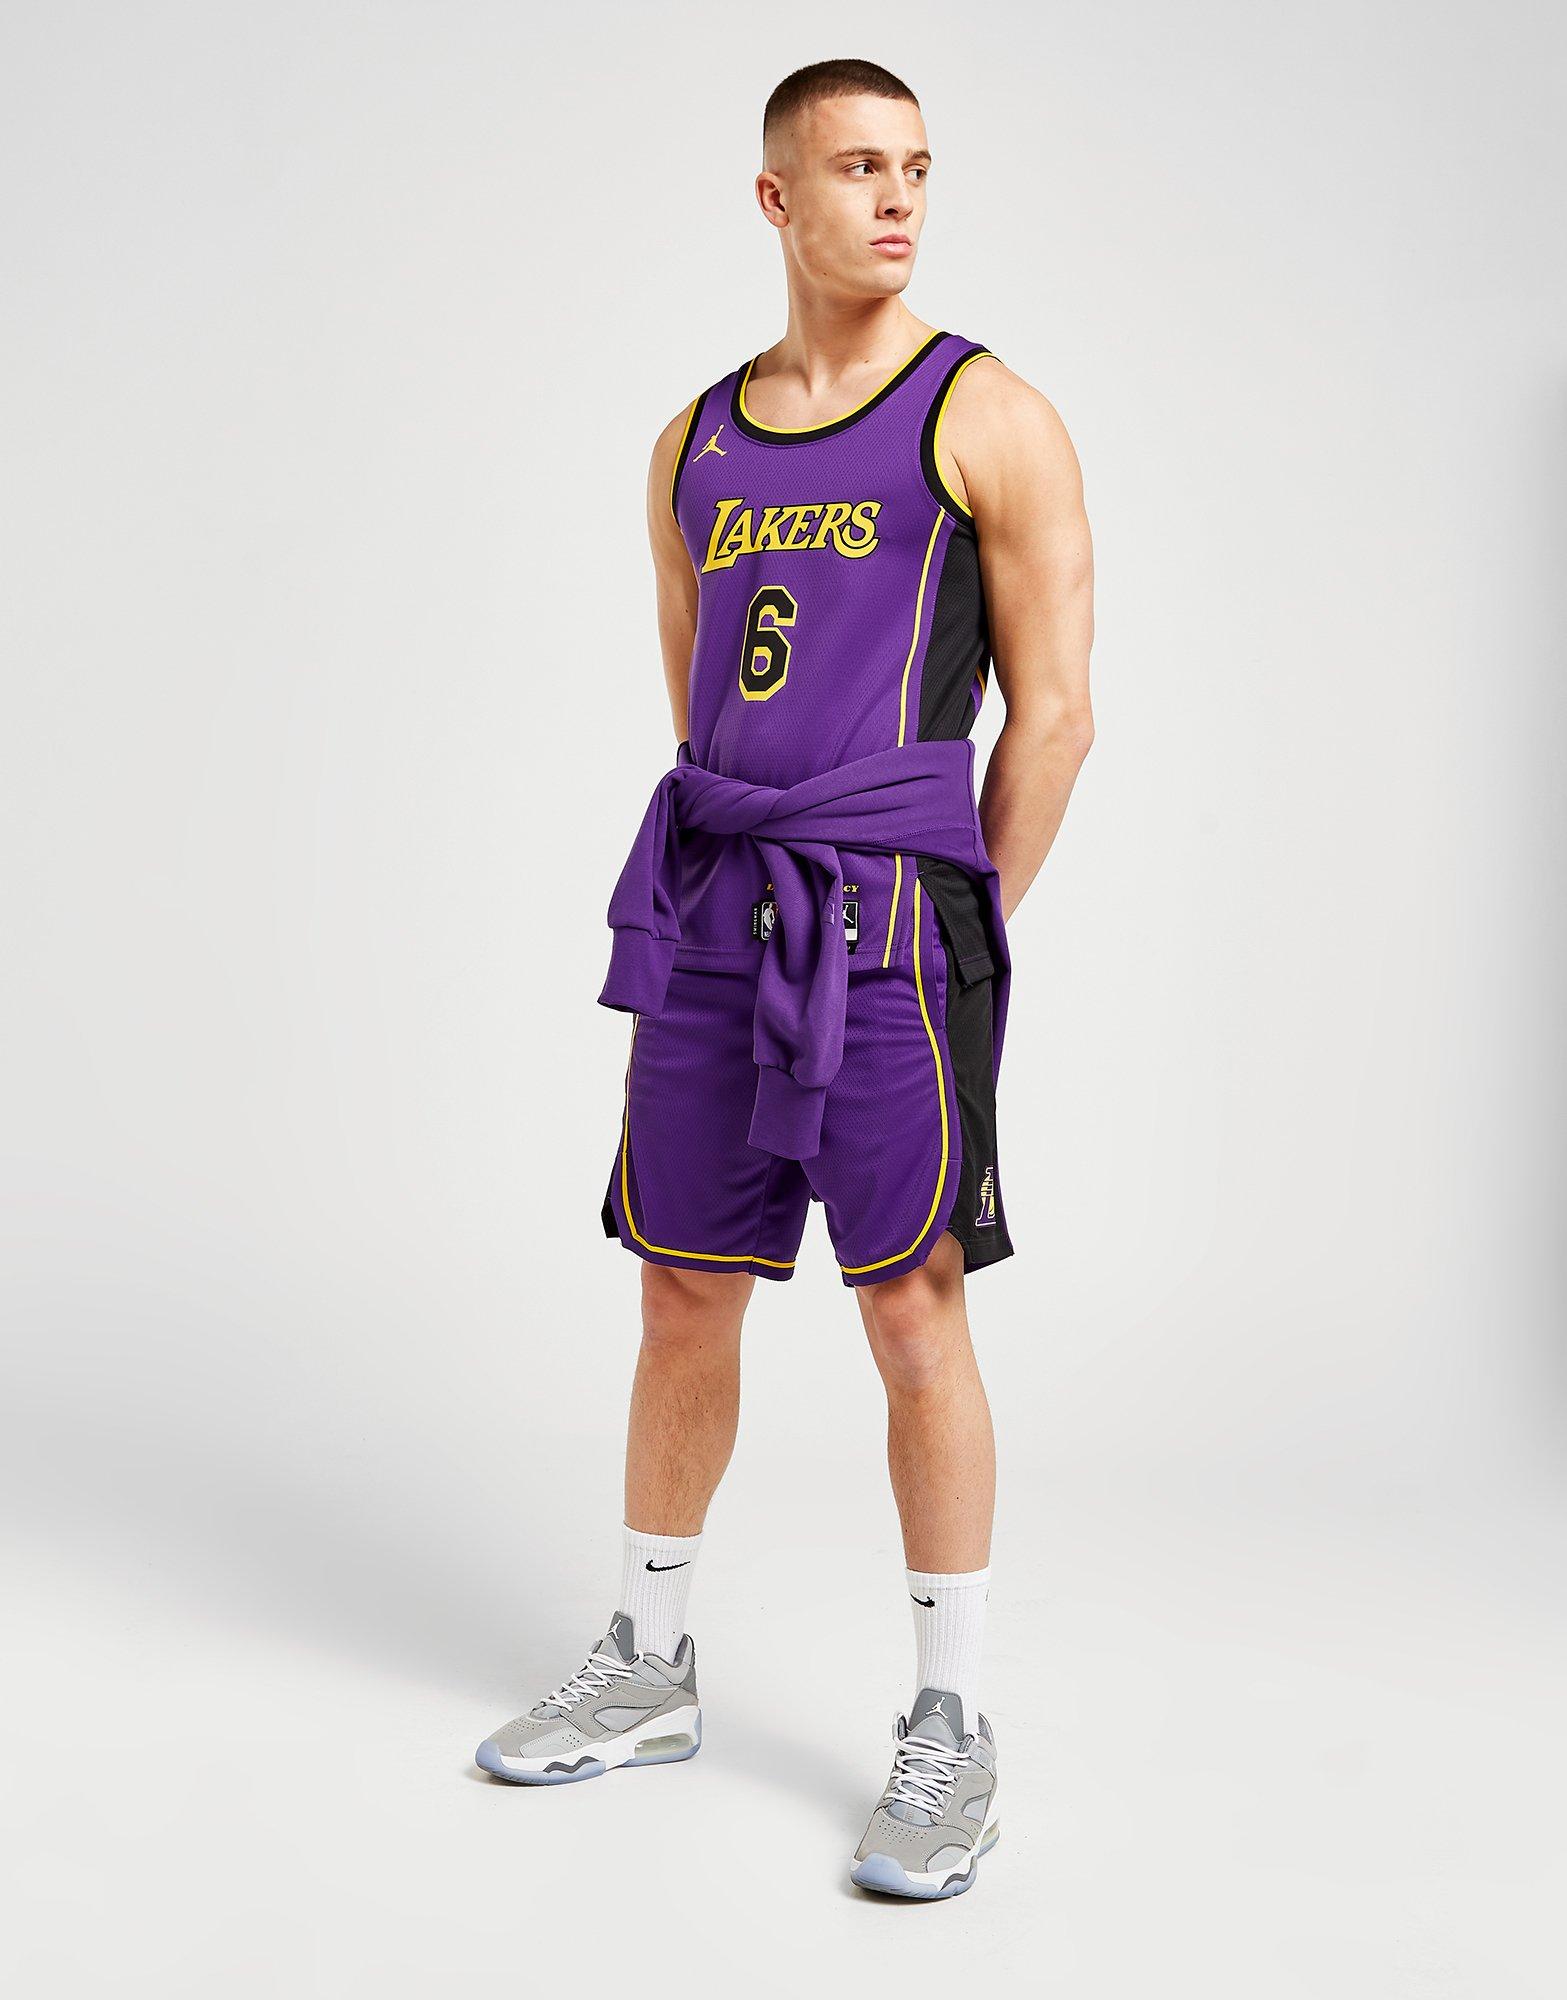 NIKE NBA LOS ANGELES LAKERS PRACTICE SHORTS FIELD PURPLE for